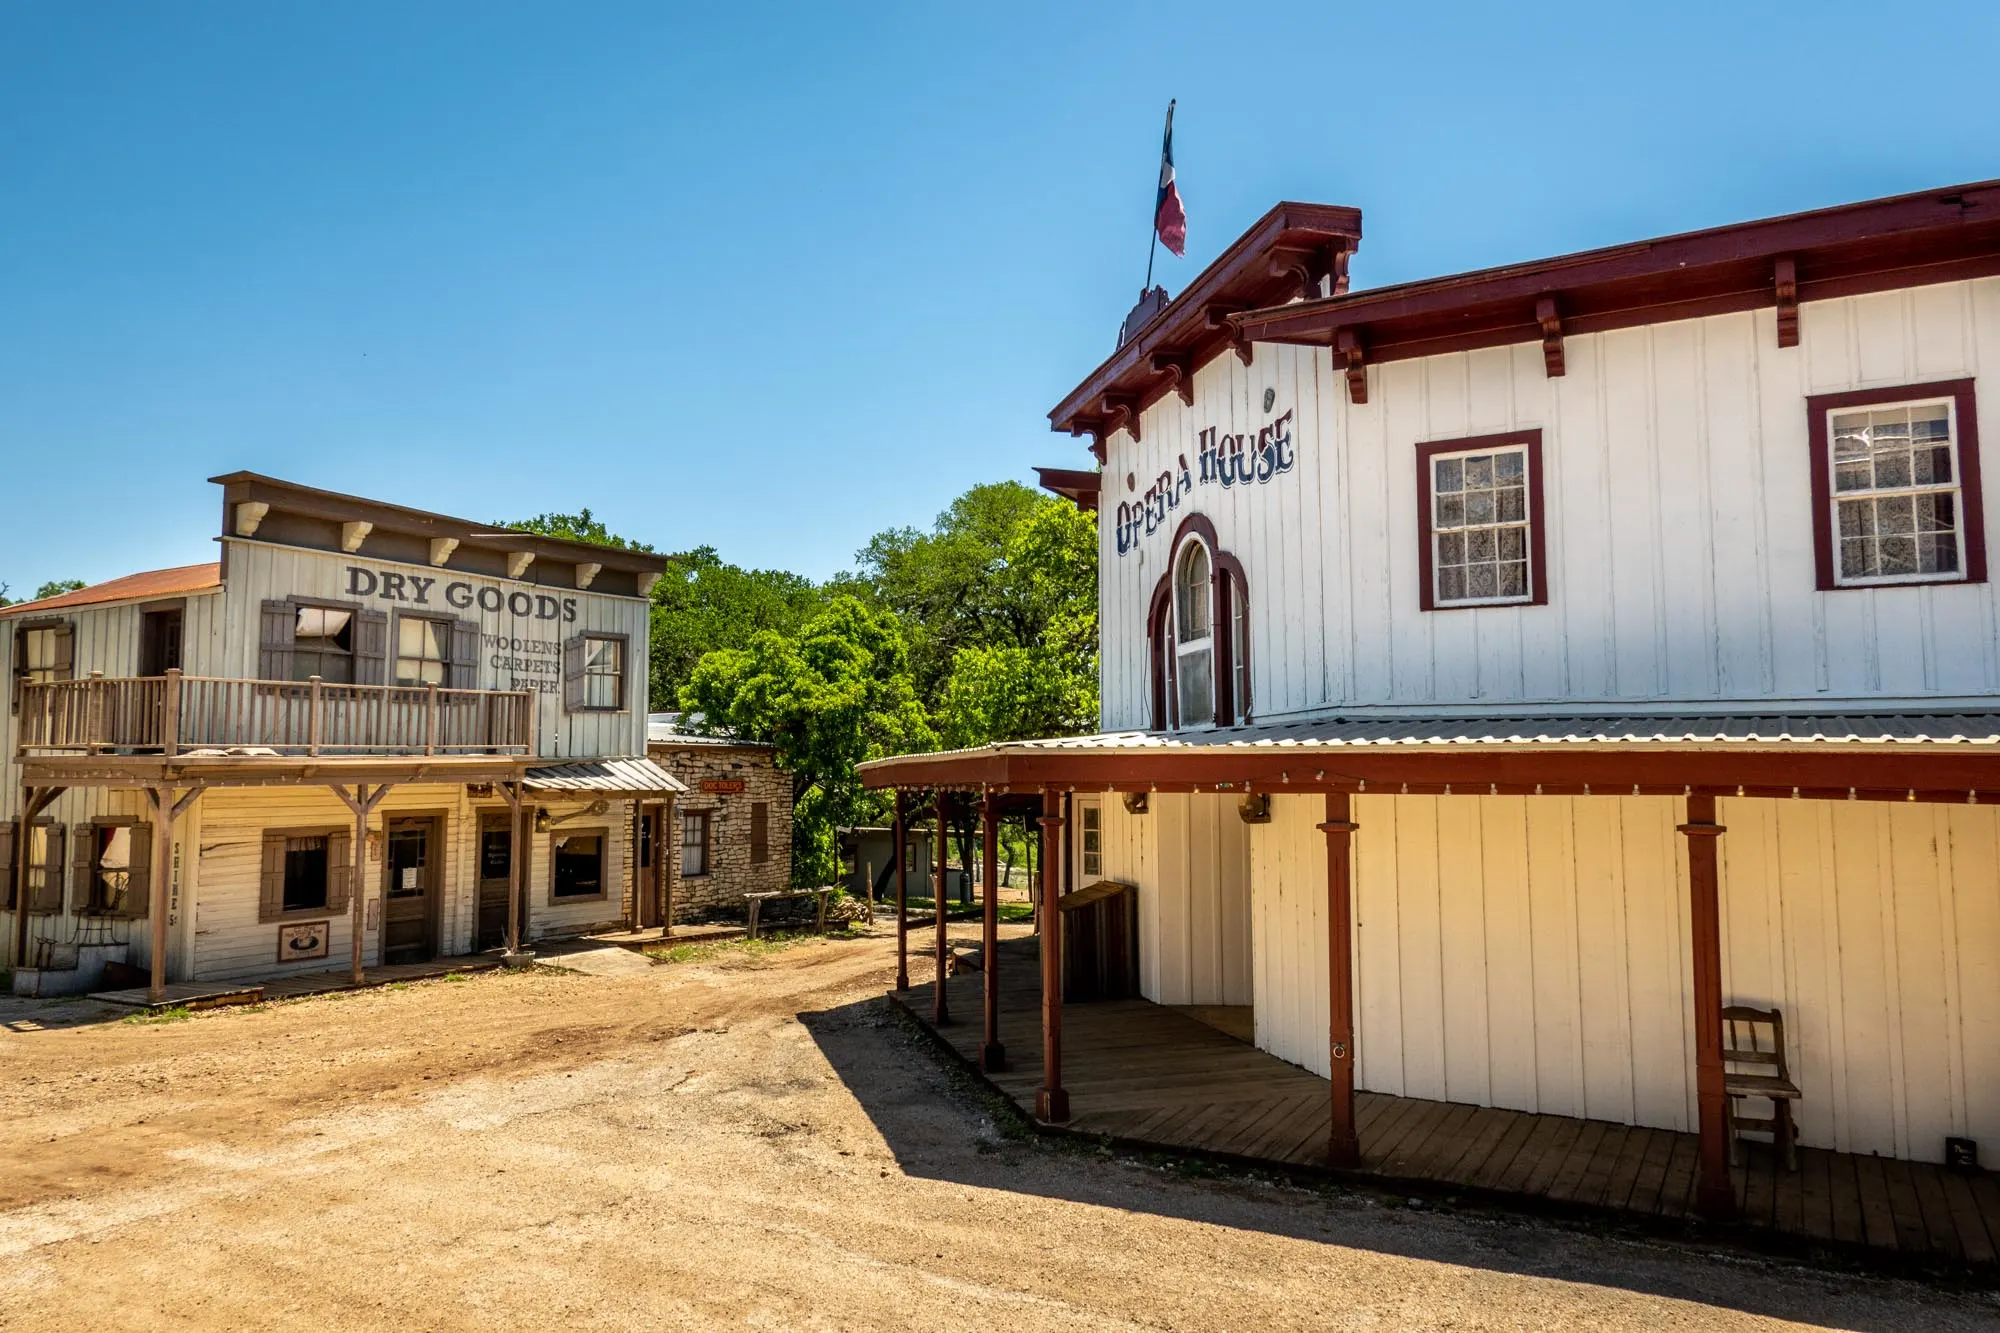 Replica Western town with a dry goods store and an opera house.